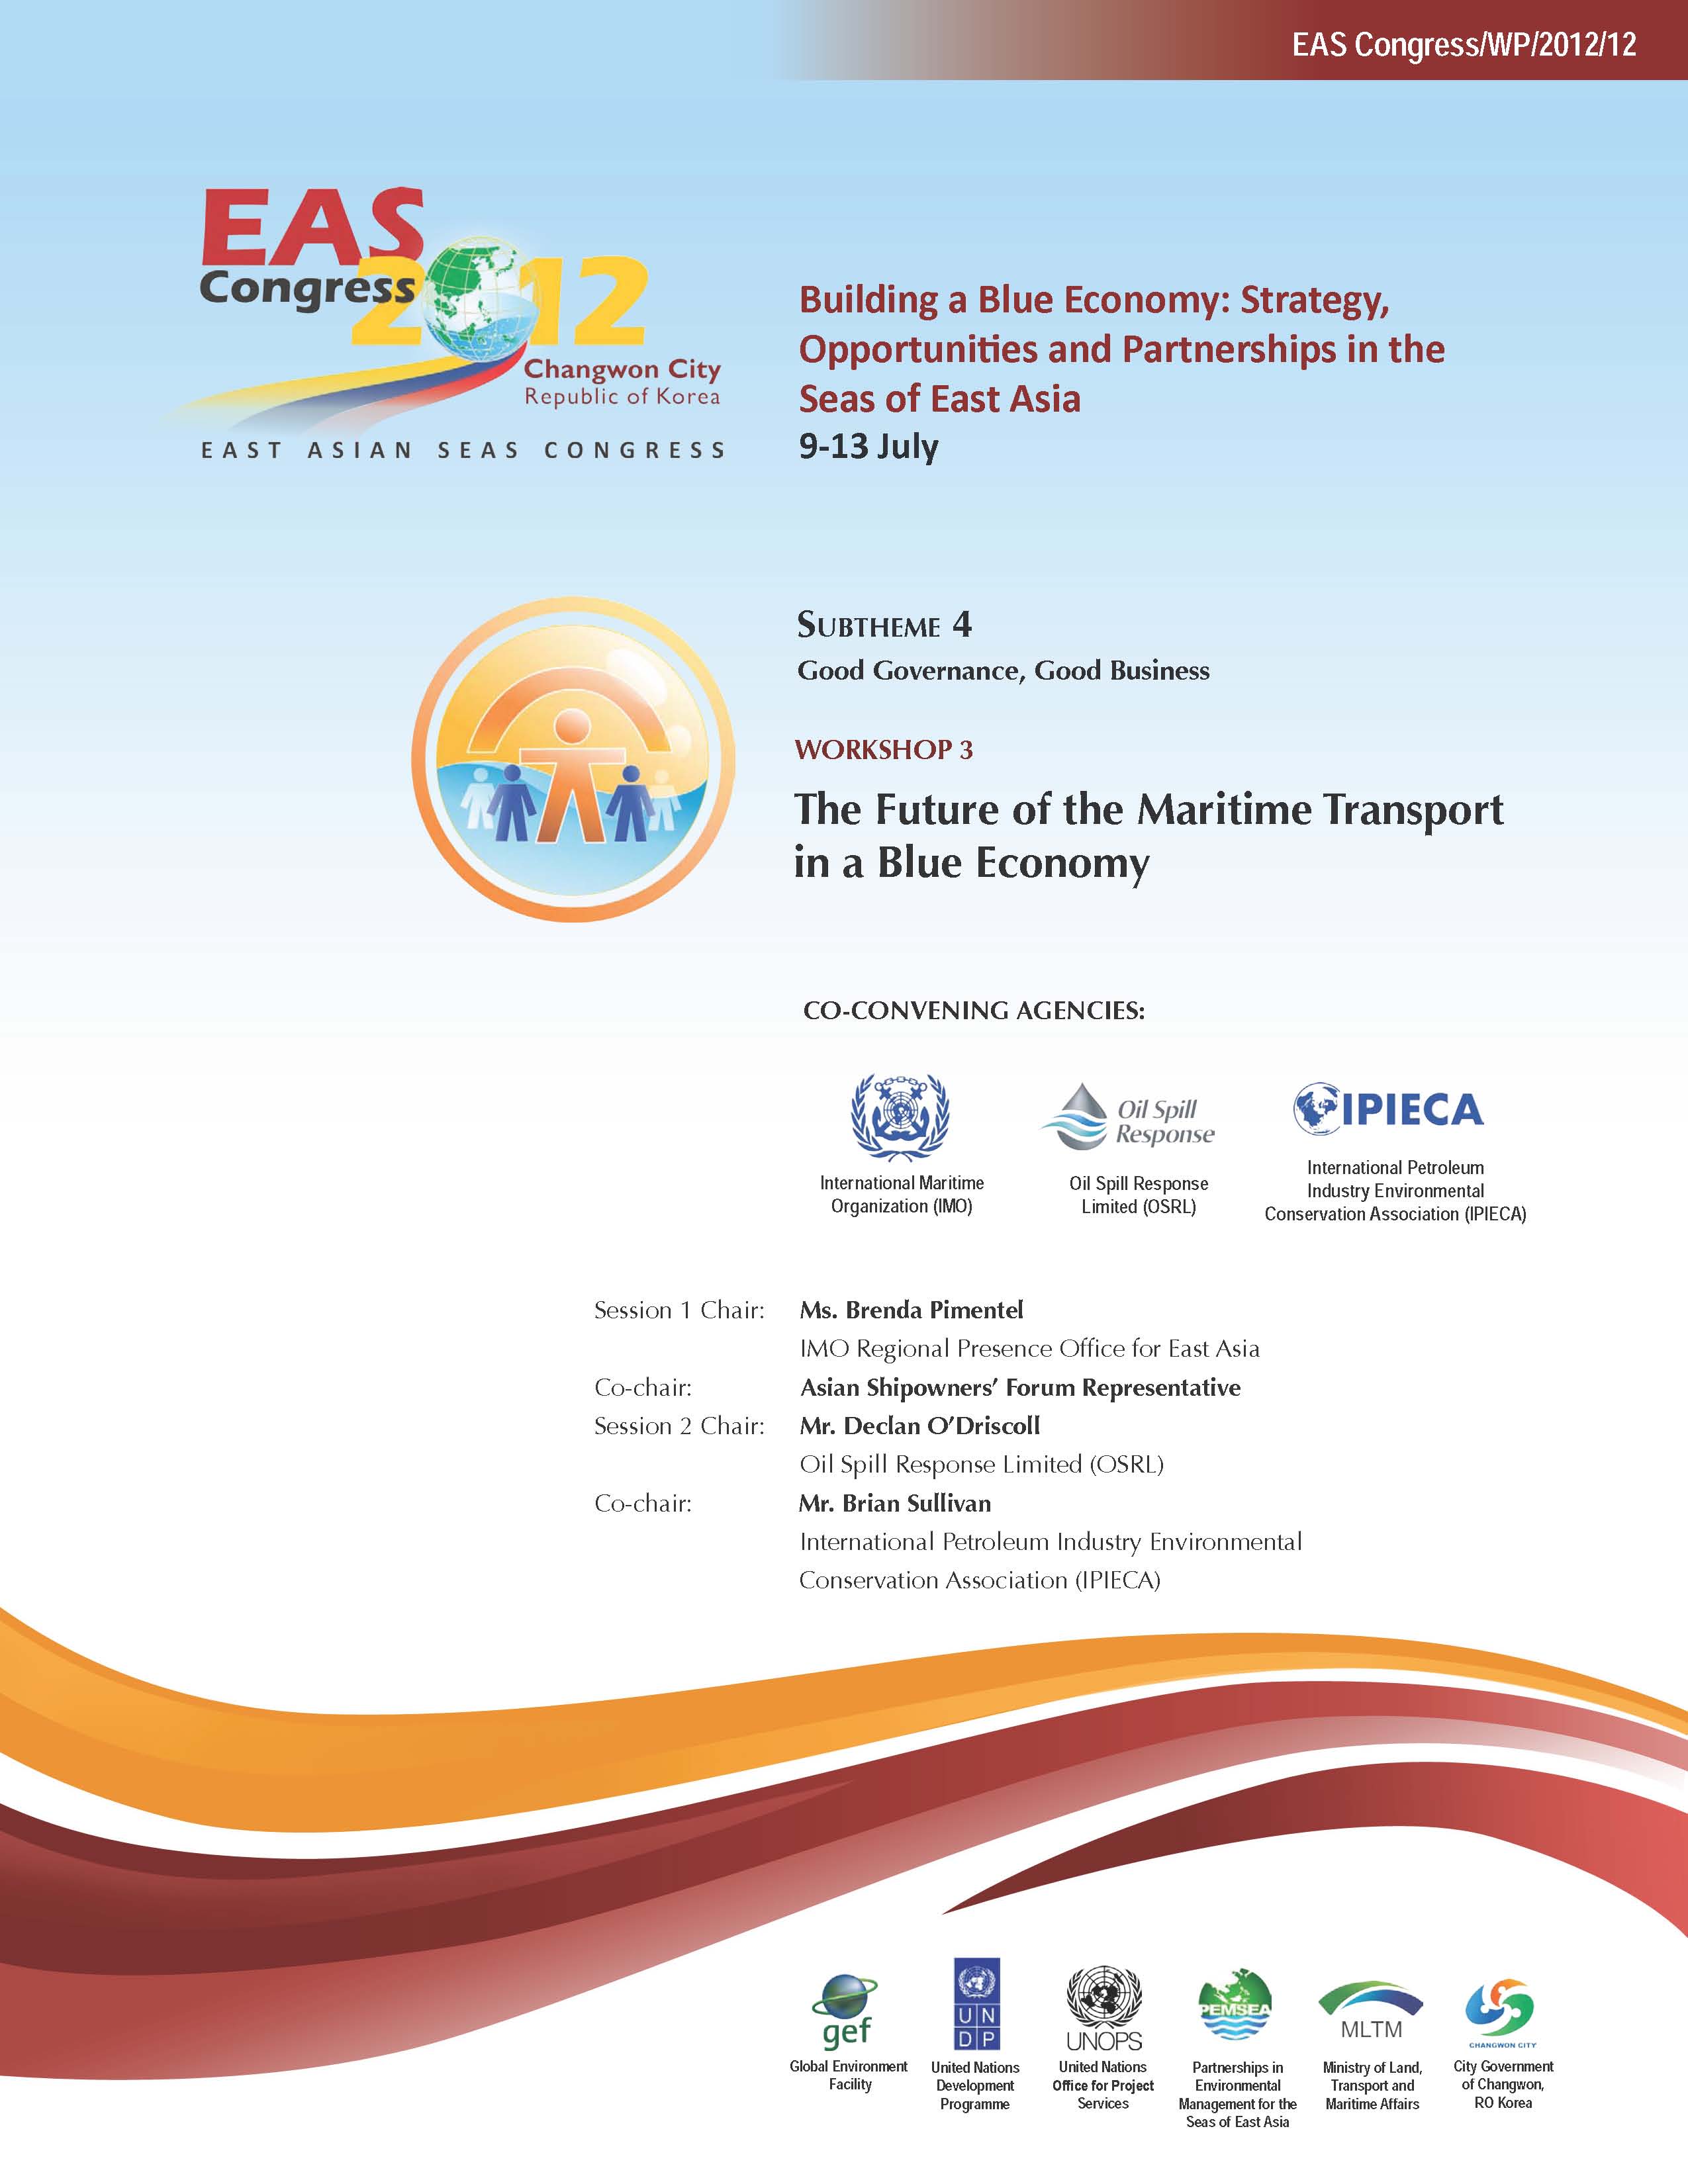 Proceedings of the Workshop on The Future of the Maritime Transport in a Blue Economy